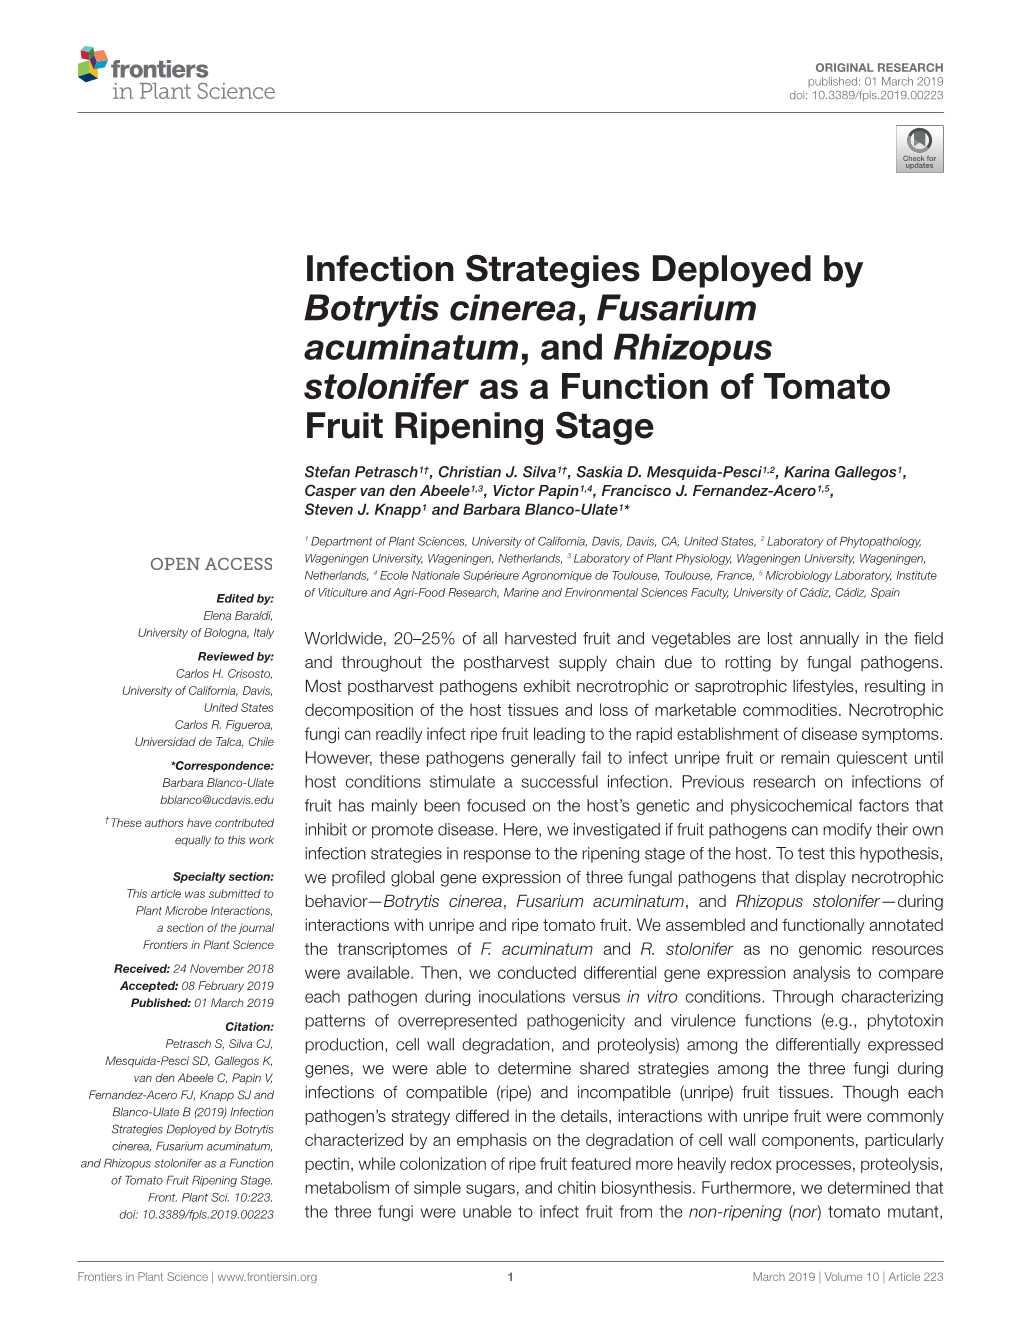 Infection Strategies Deployed by Botrytis Cinerea, Fusarium Acuminatum, and Rhizopus Stolonifer As a Function of Tomato Fruit Ripening Stage